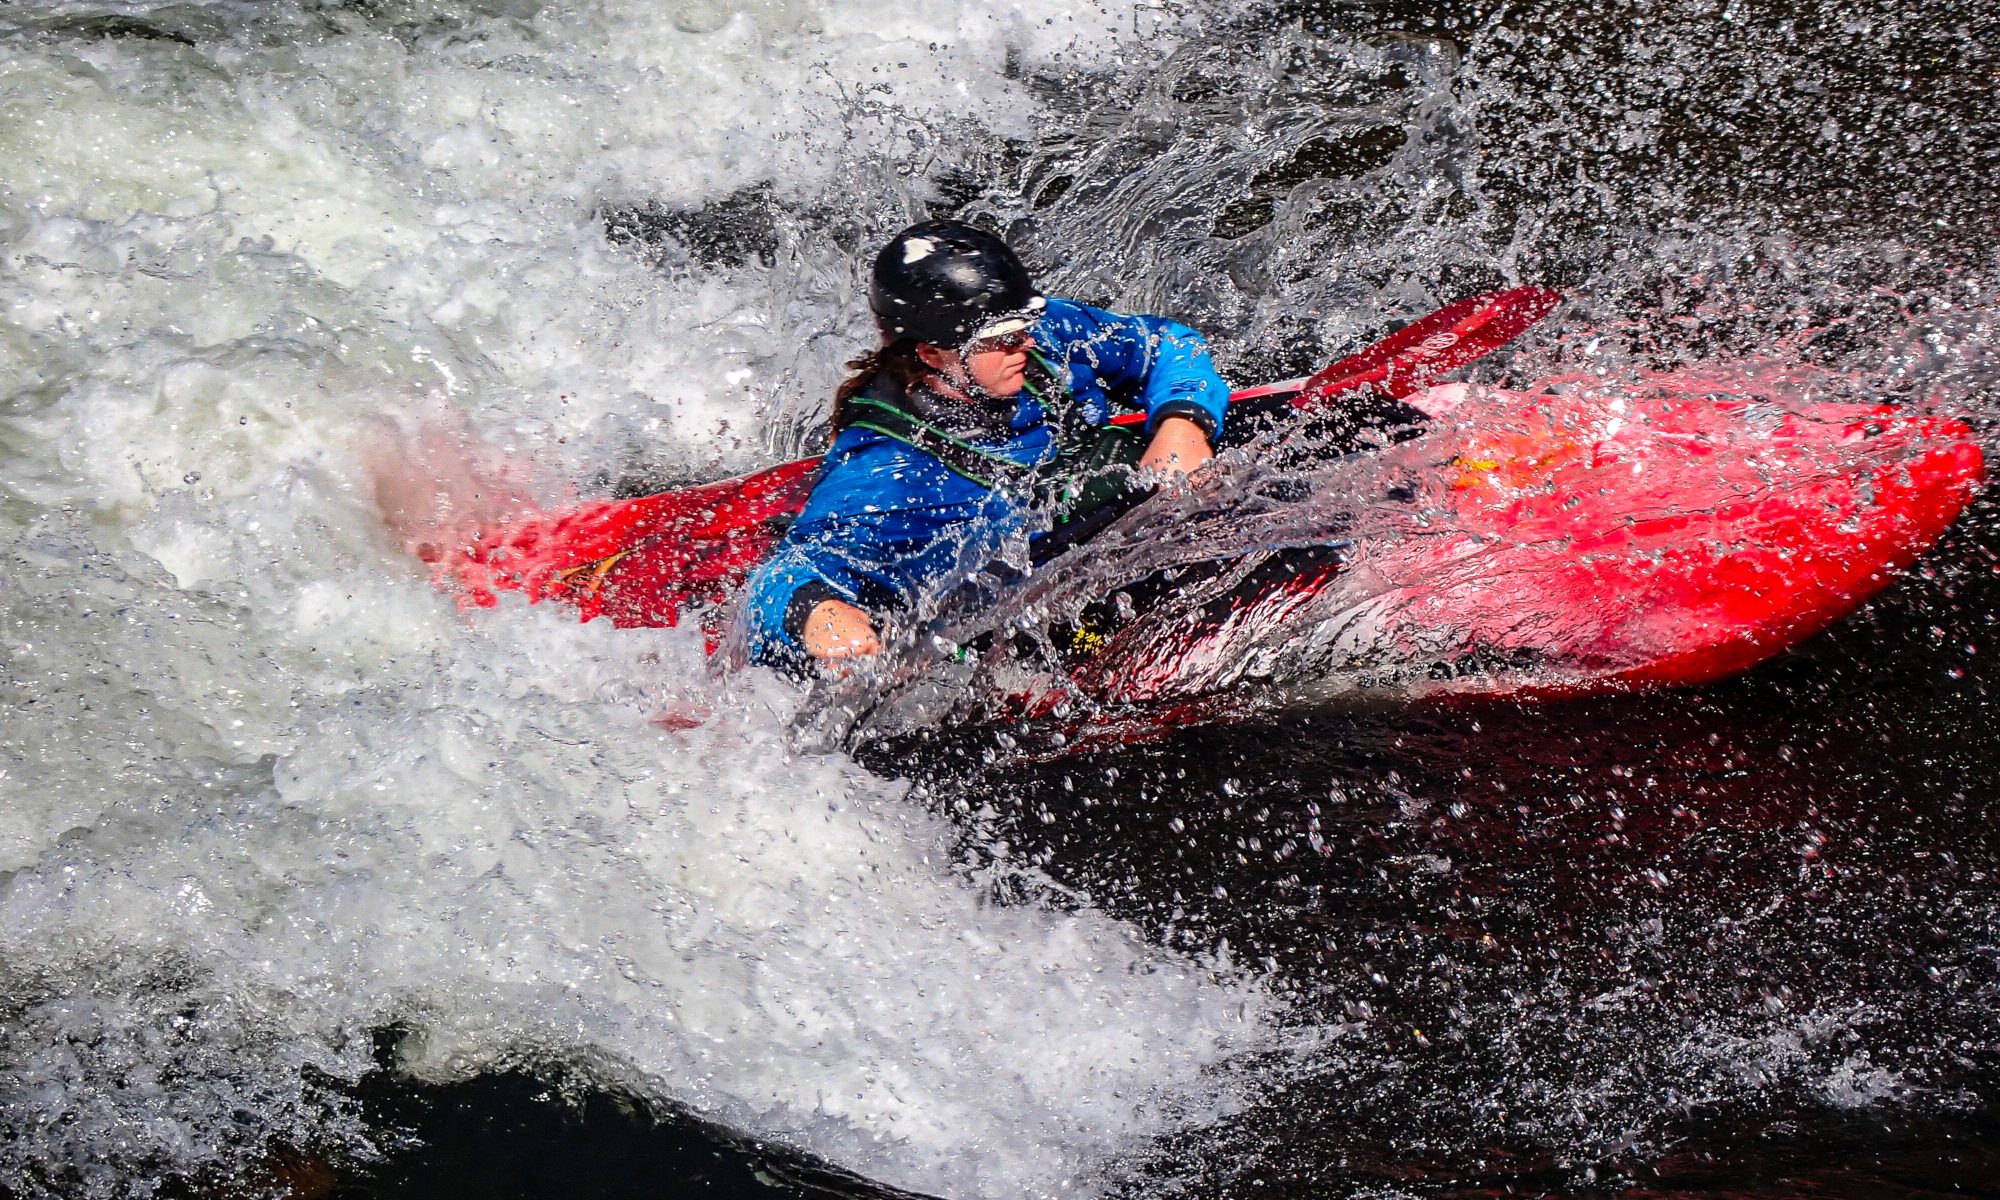 GO KAYAK NOW Sea, Surf, & White Water Kayaking in the midwest